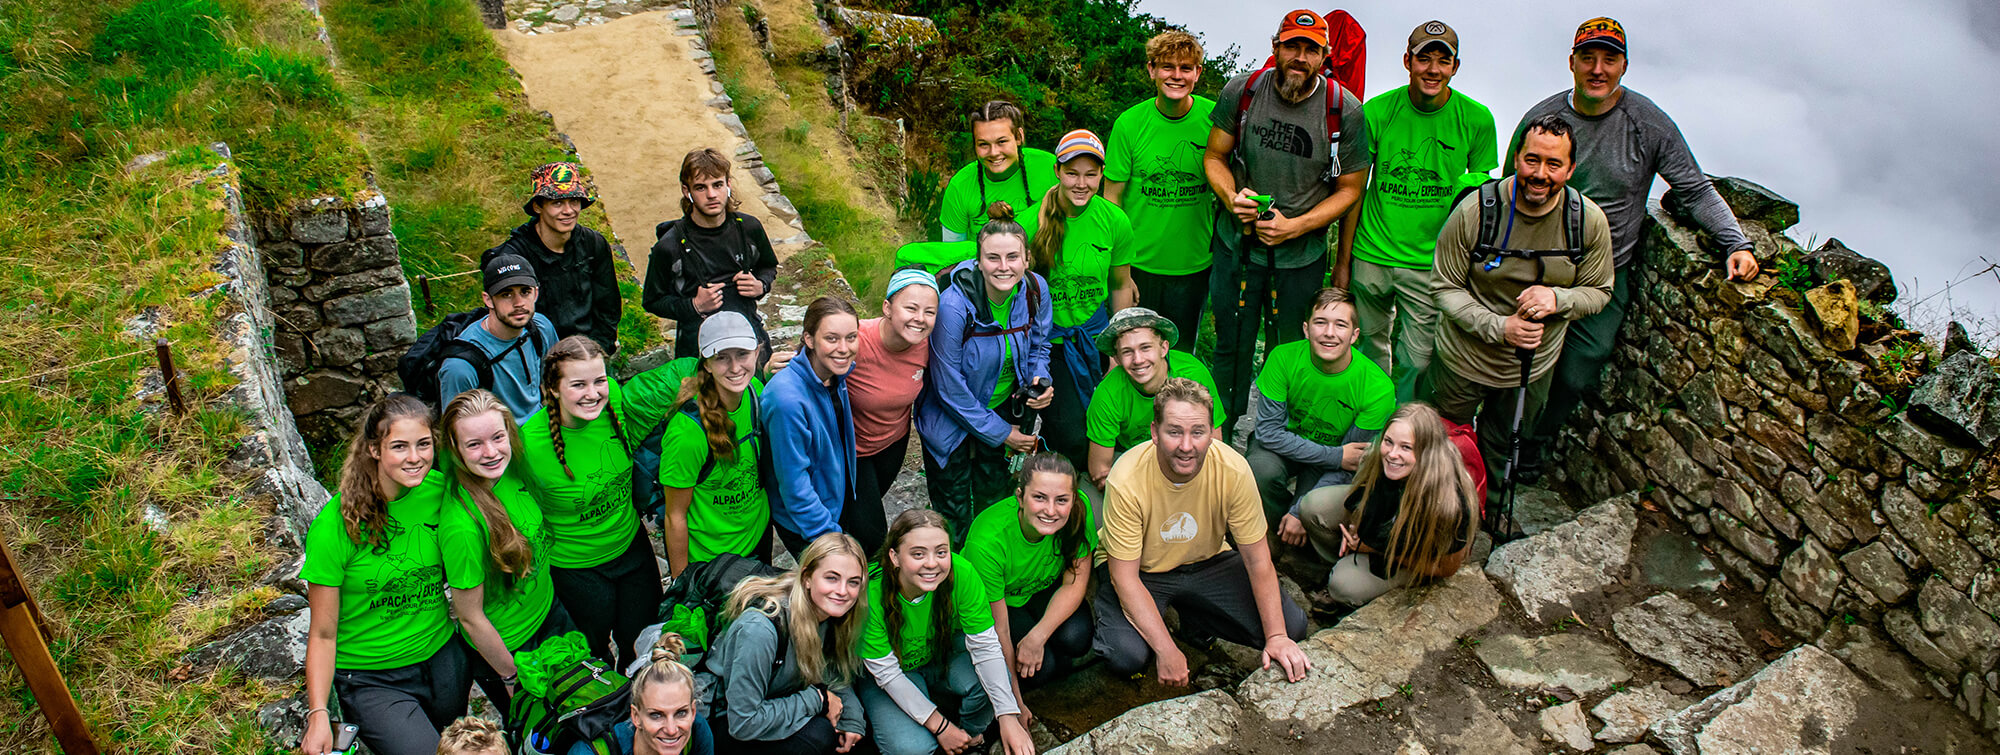 Group poses with ruins on Choquequirao Trek